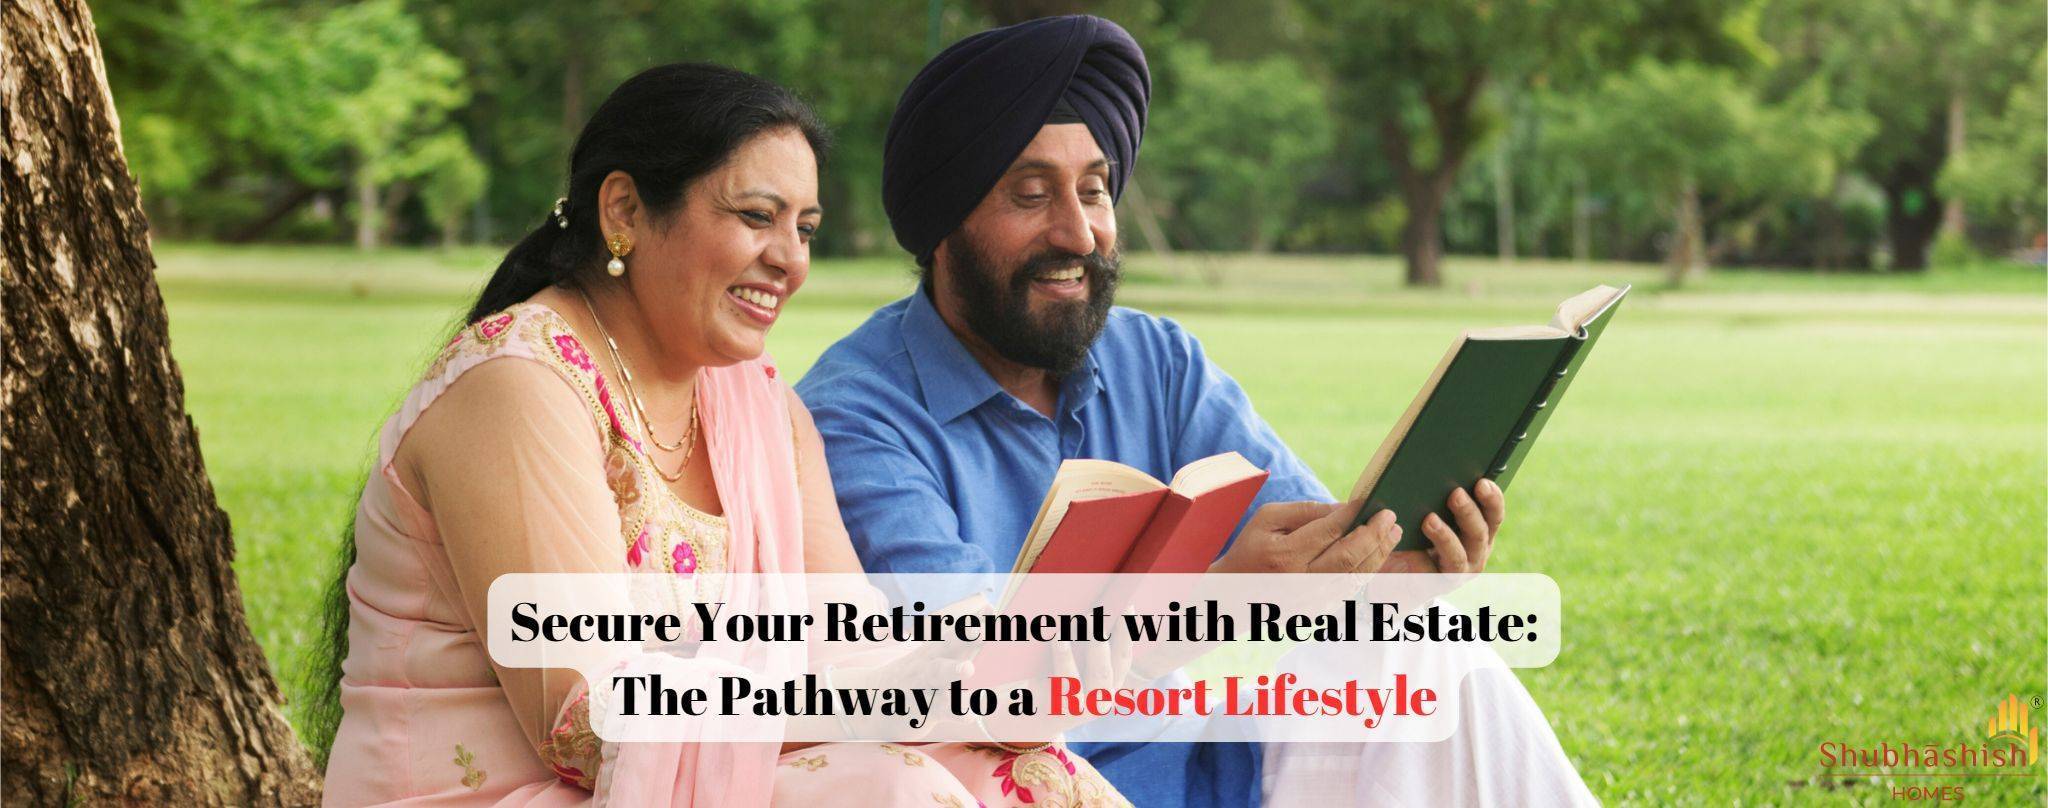 Secure Your Retirement with Real Estate: The Pathway to a Resort Lifestyle